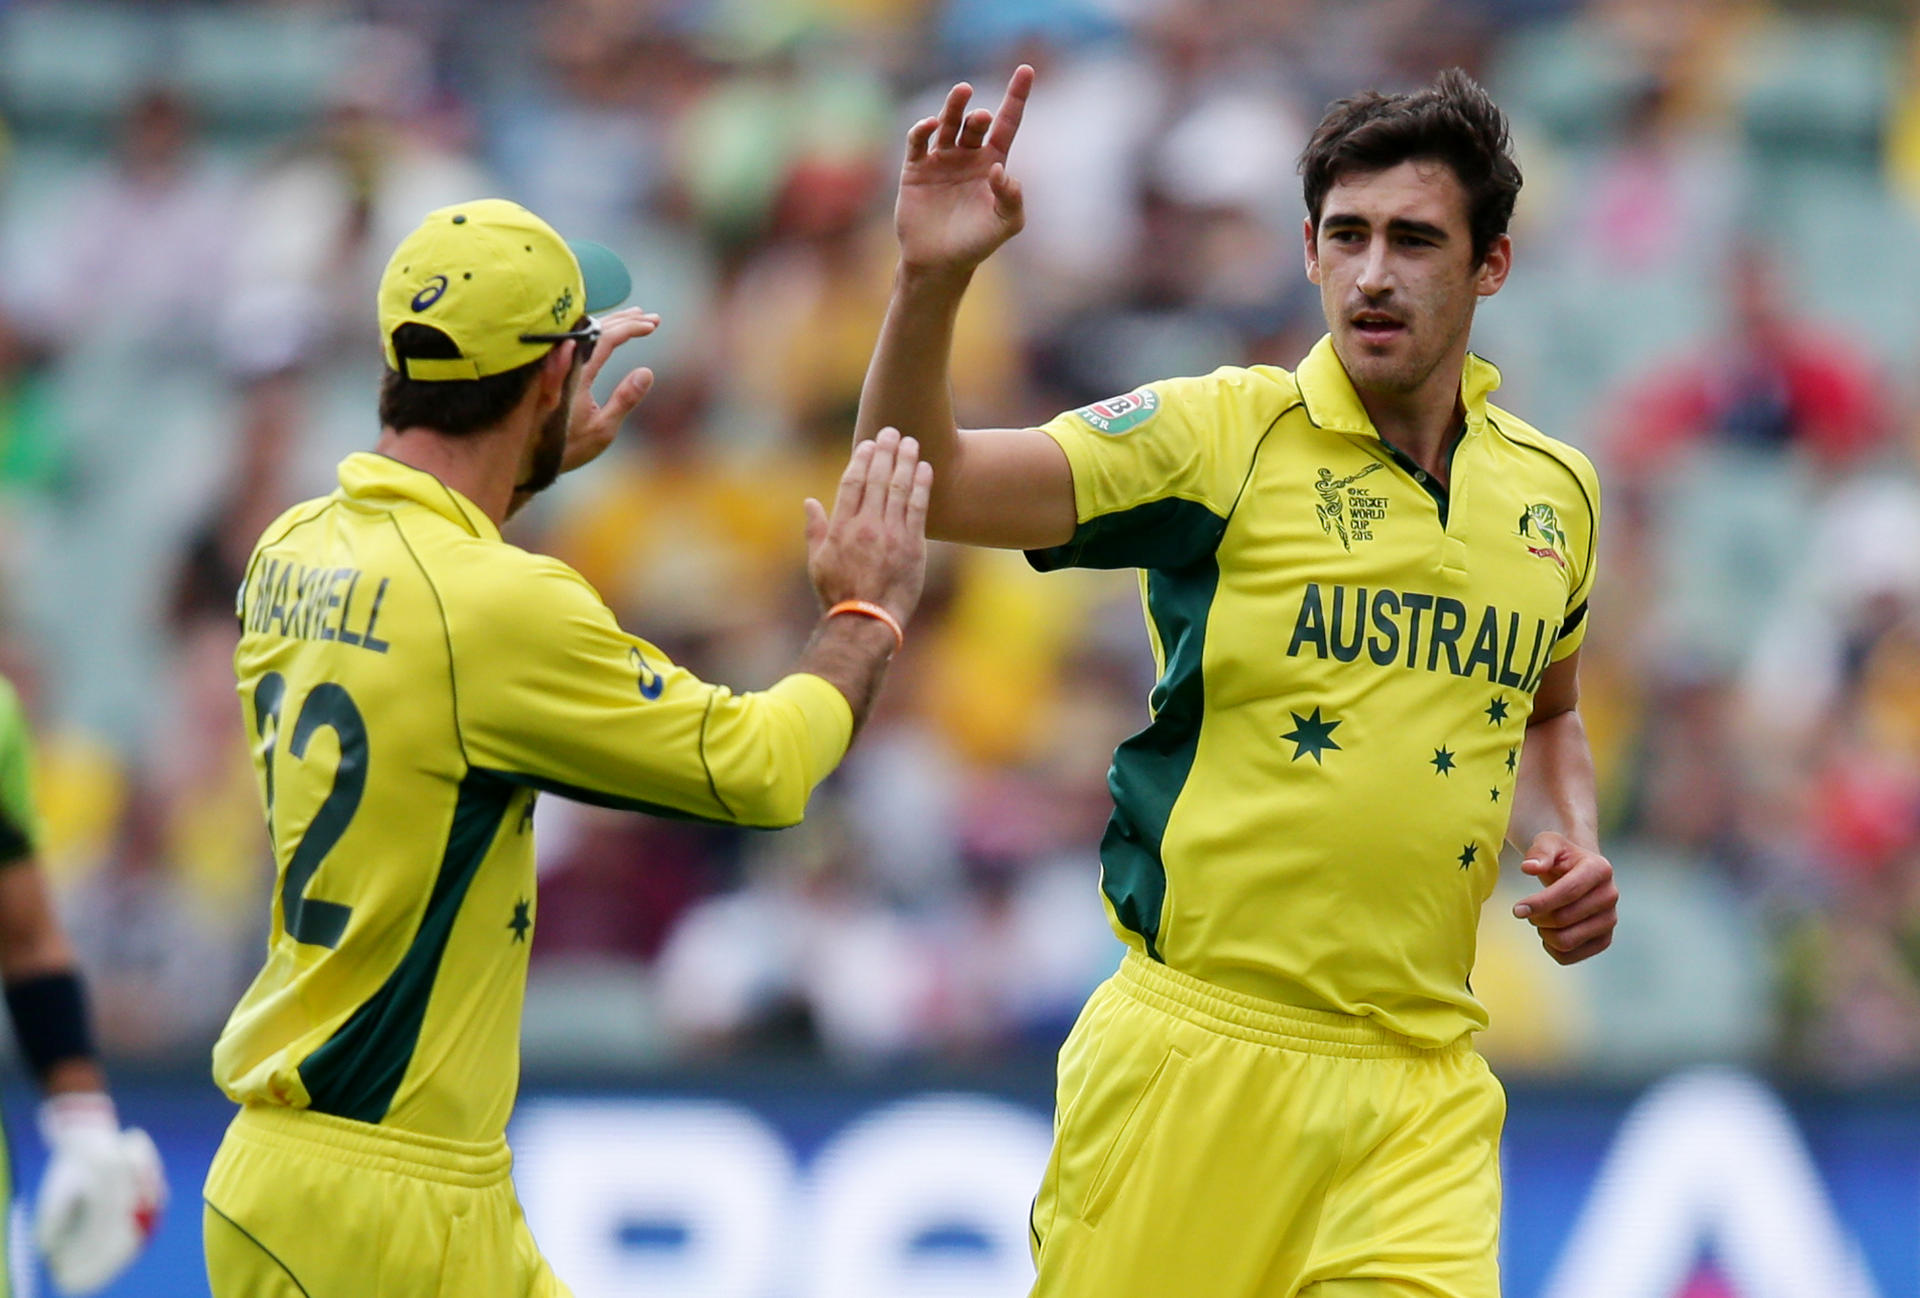 Australian quick Mitchell Starc will want a bouncy track at the Sydney Cricket Ground. Photo: AP